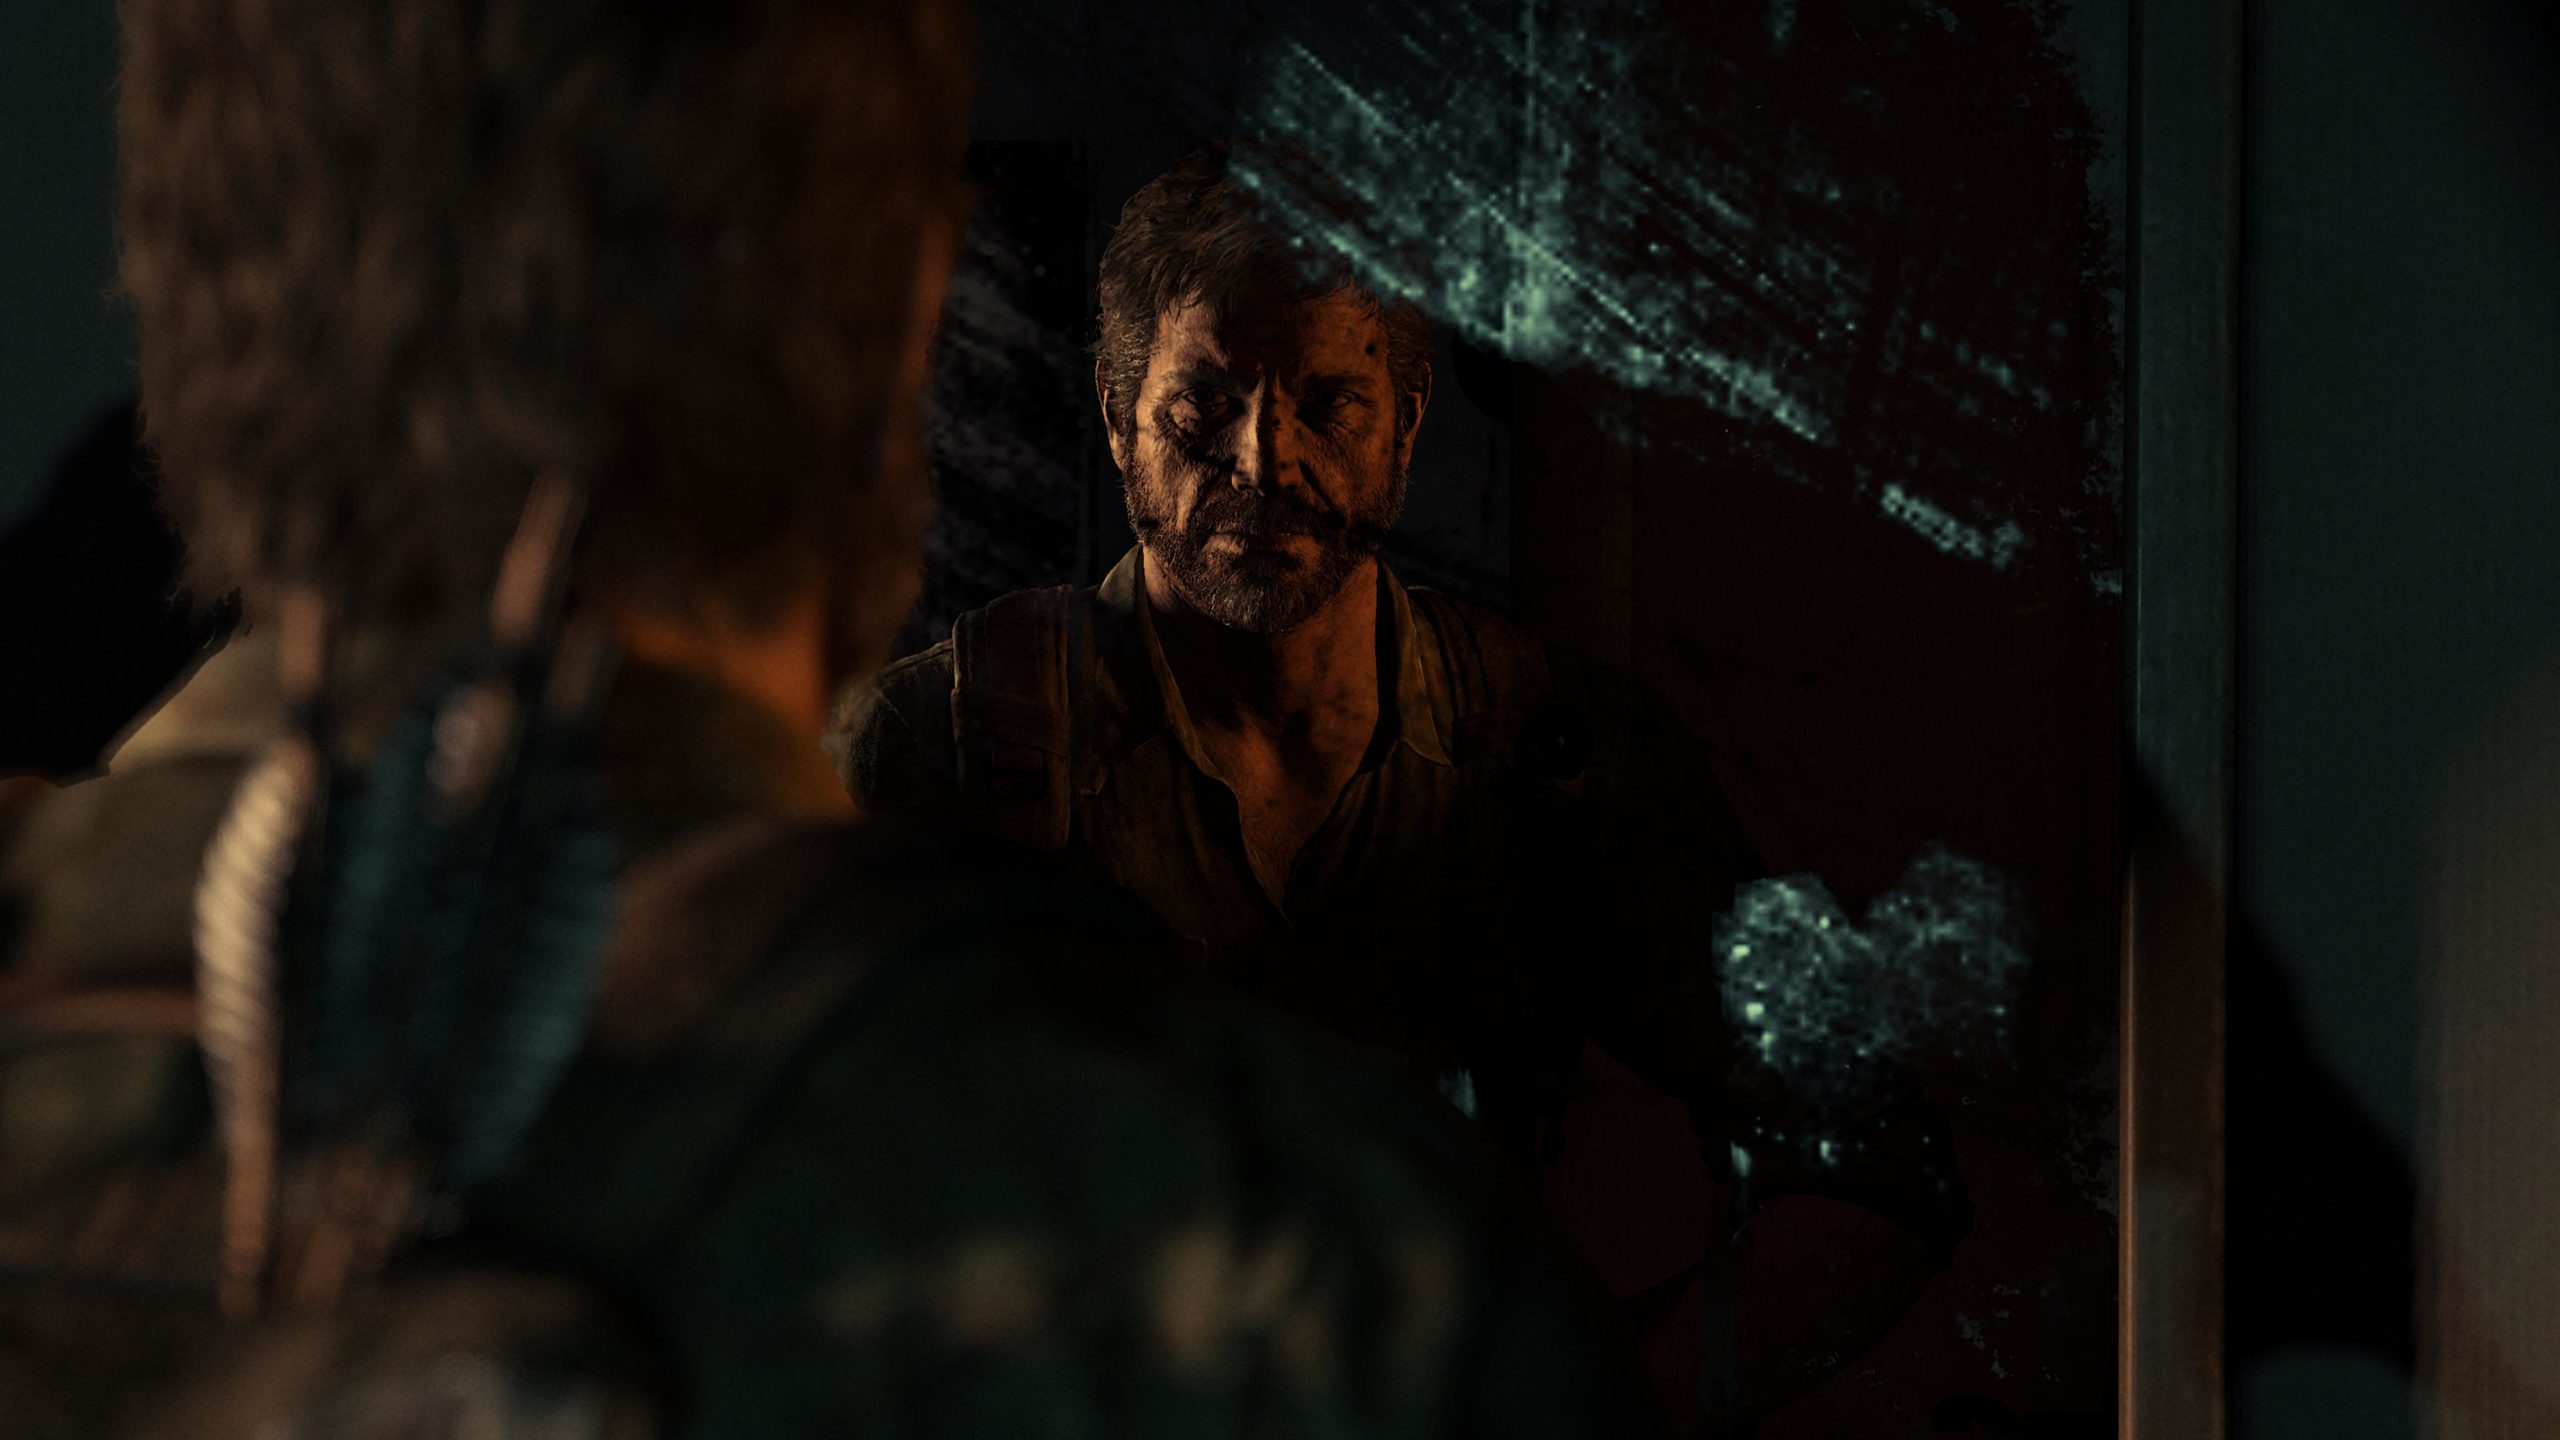 The Last of Us Part 1 Accessibility Review — Can I Play That?